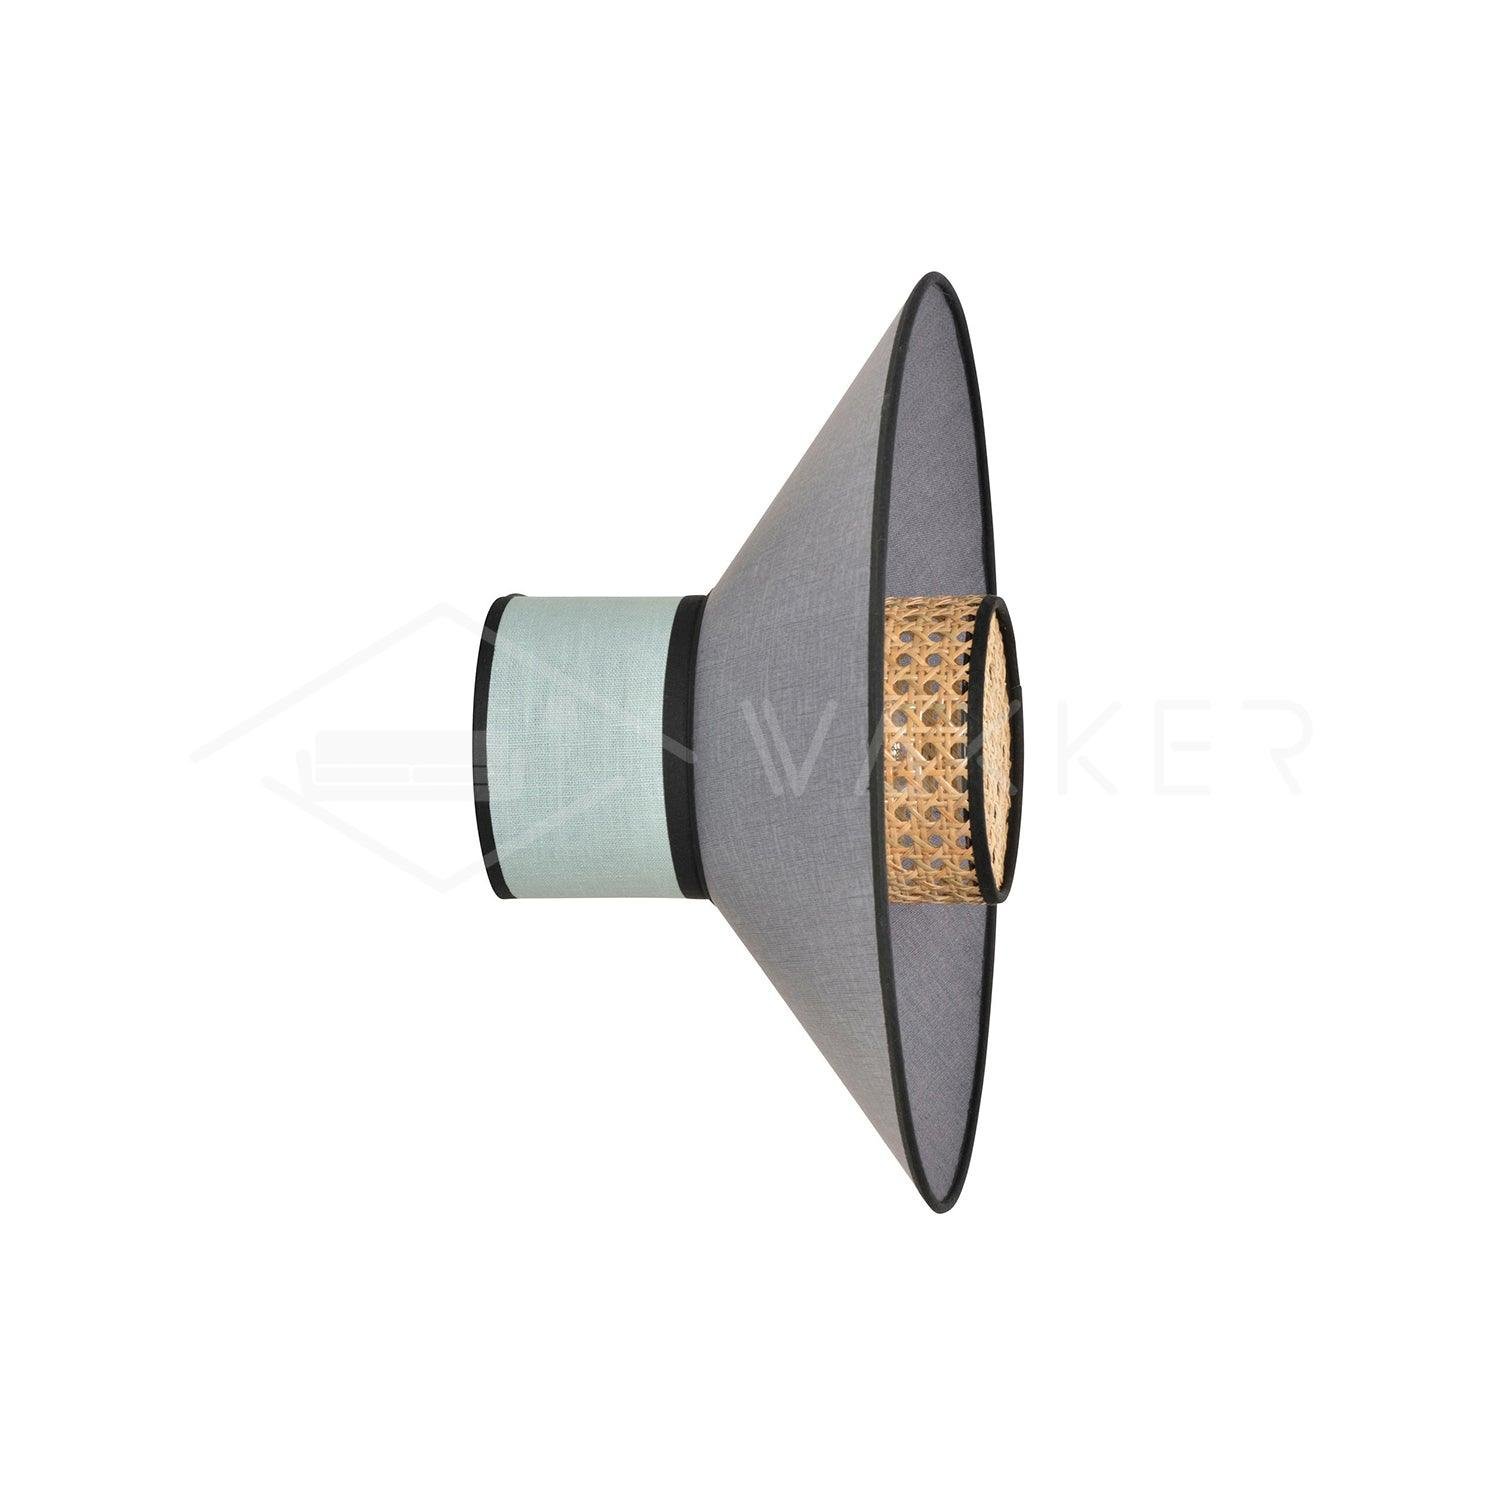 Singaporean Conical Wall Light in Almond/Anthracite, Diameter 40cm x Height 22cm (2 Pieces)